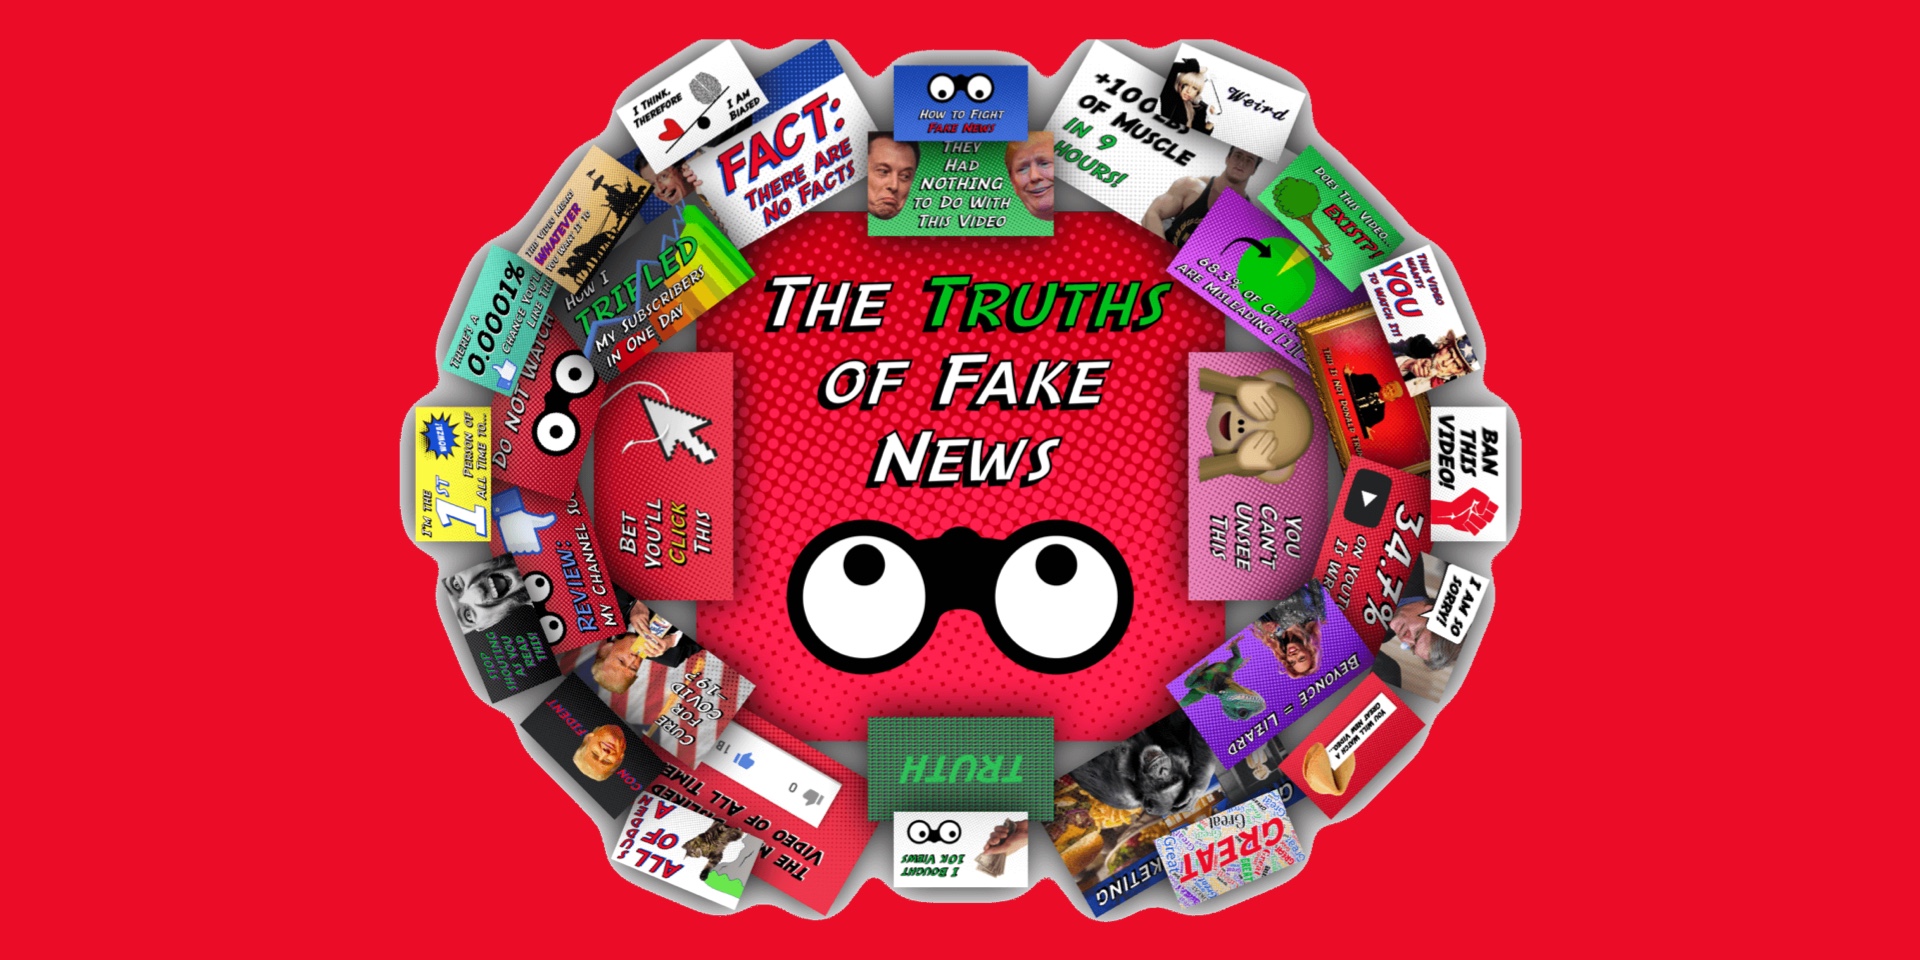 The Truths of Fake News